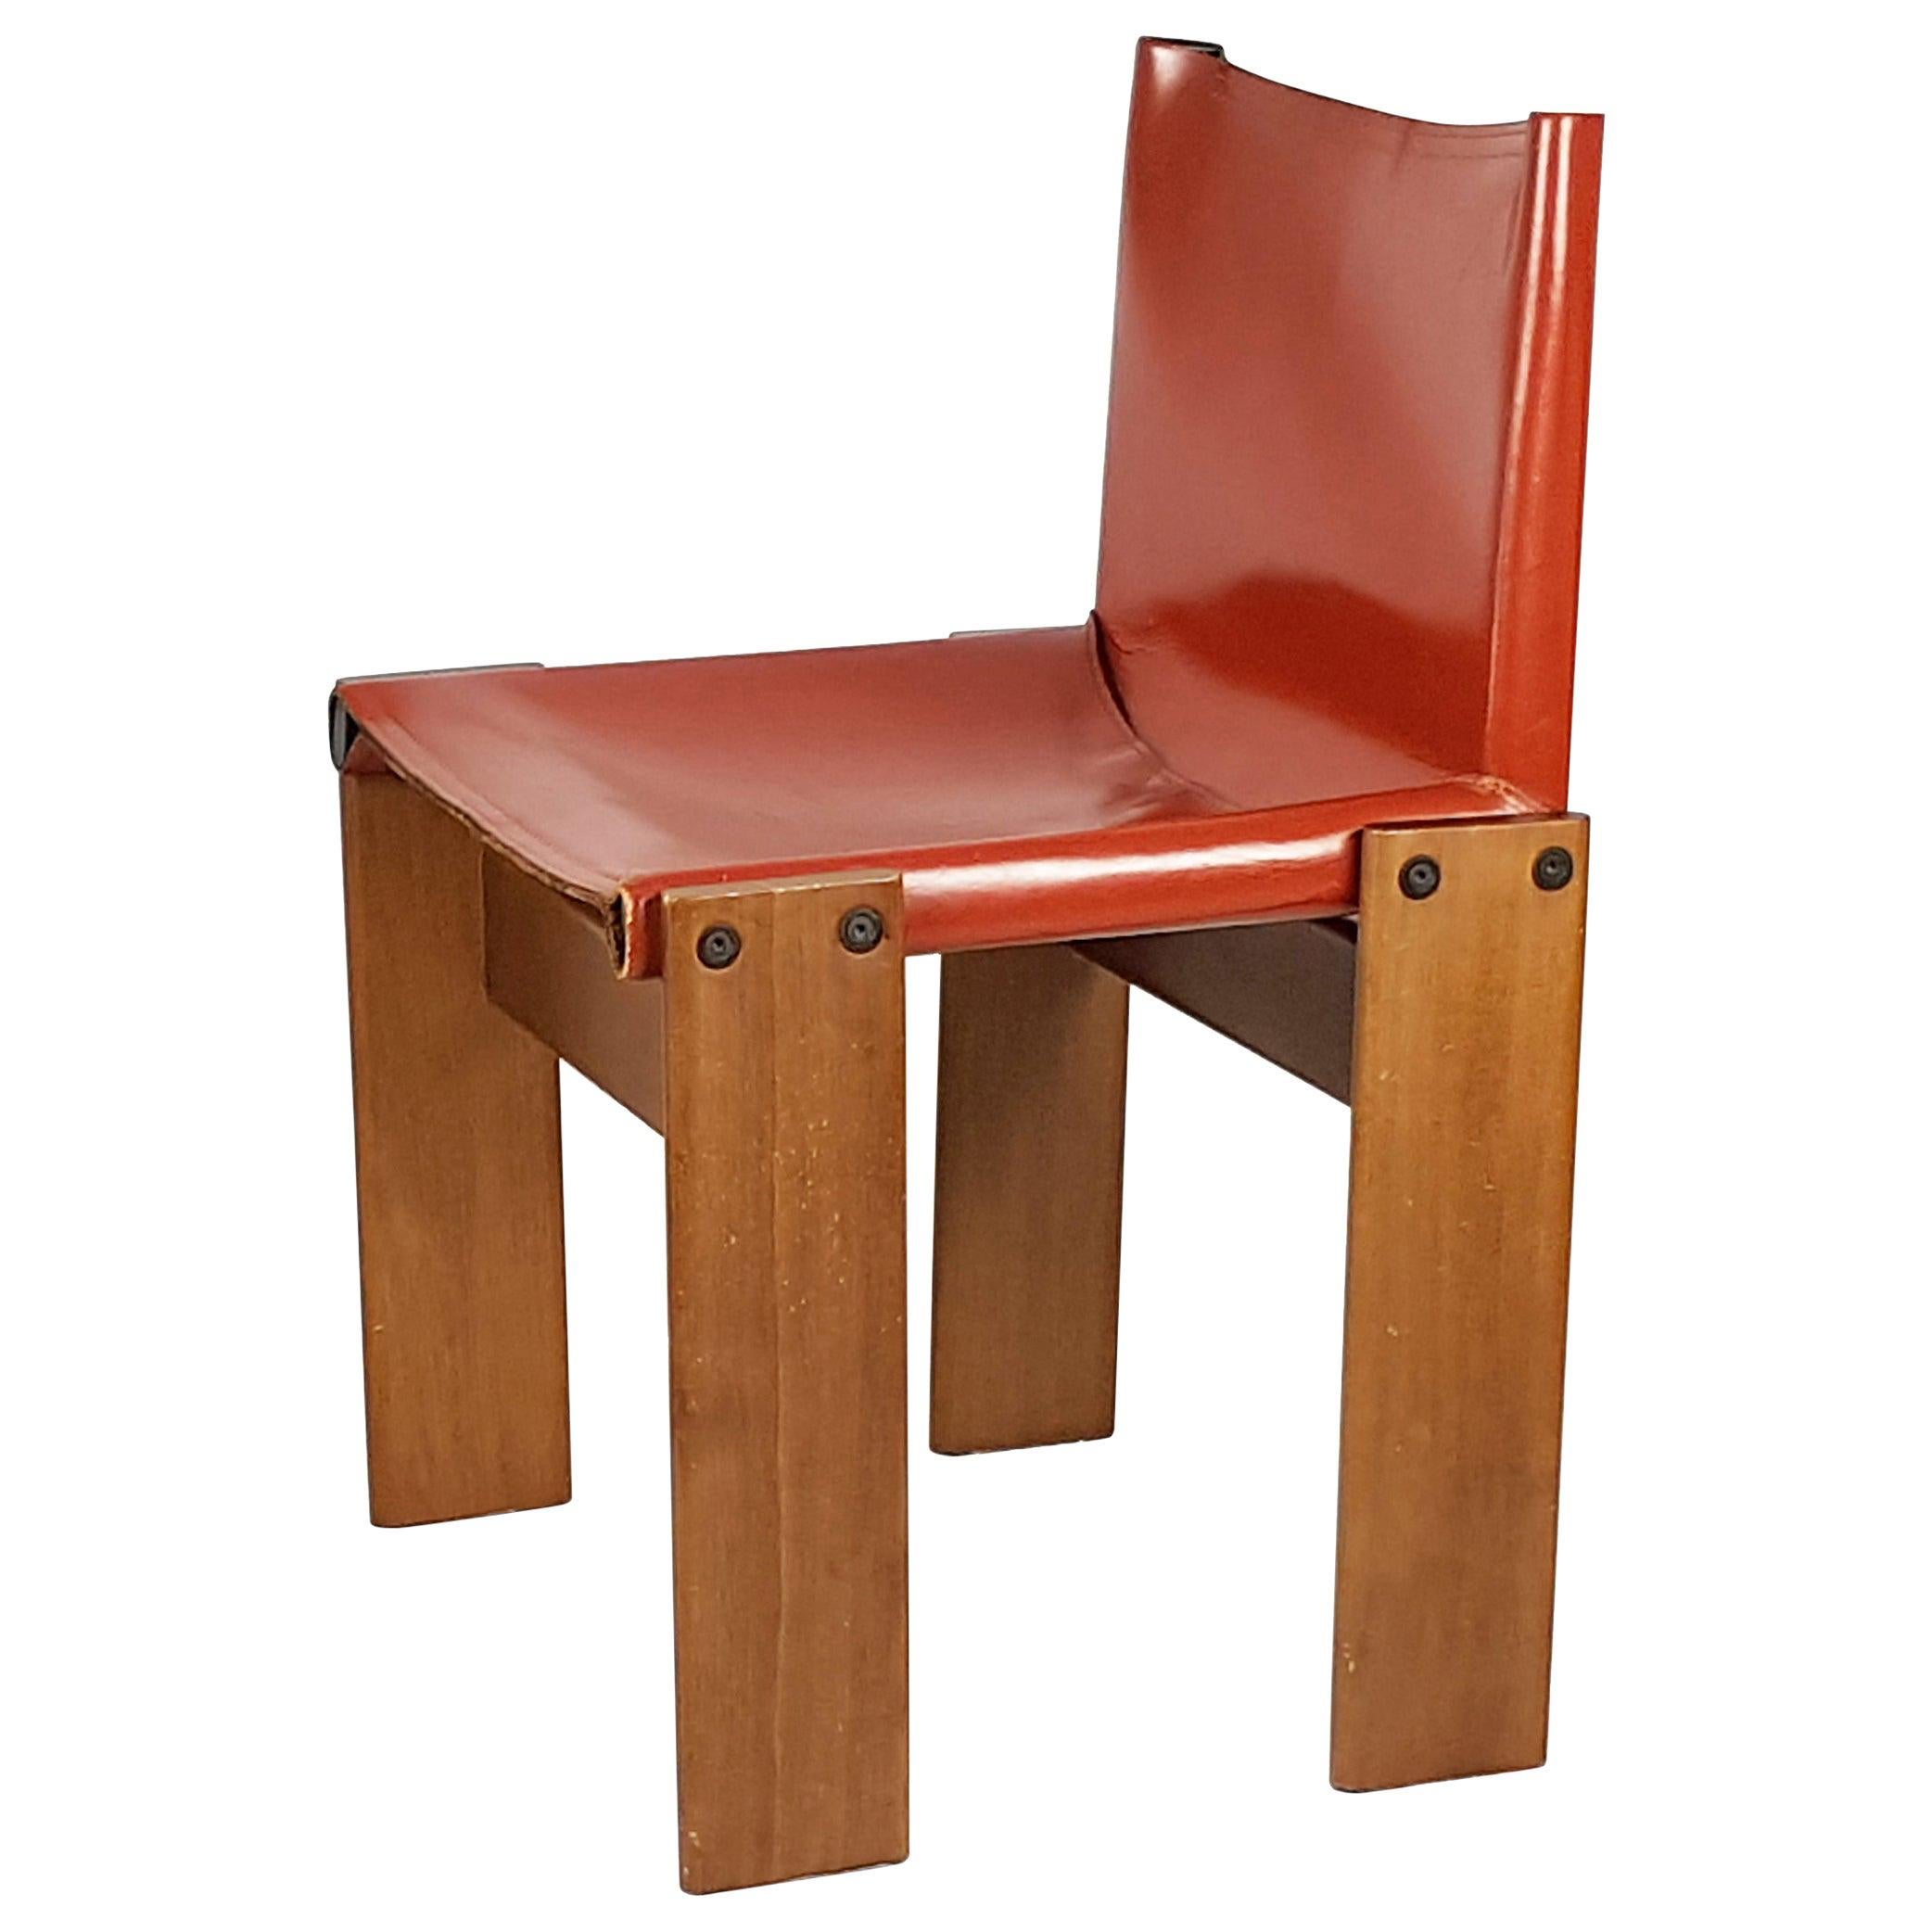 Brick Red leather and Walnut 1974 Monk Chair by Afra e Tobia Scarpa for Molteni